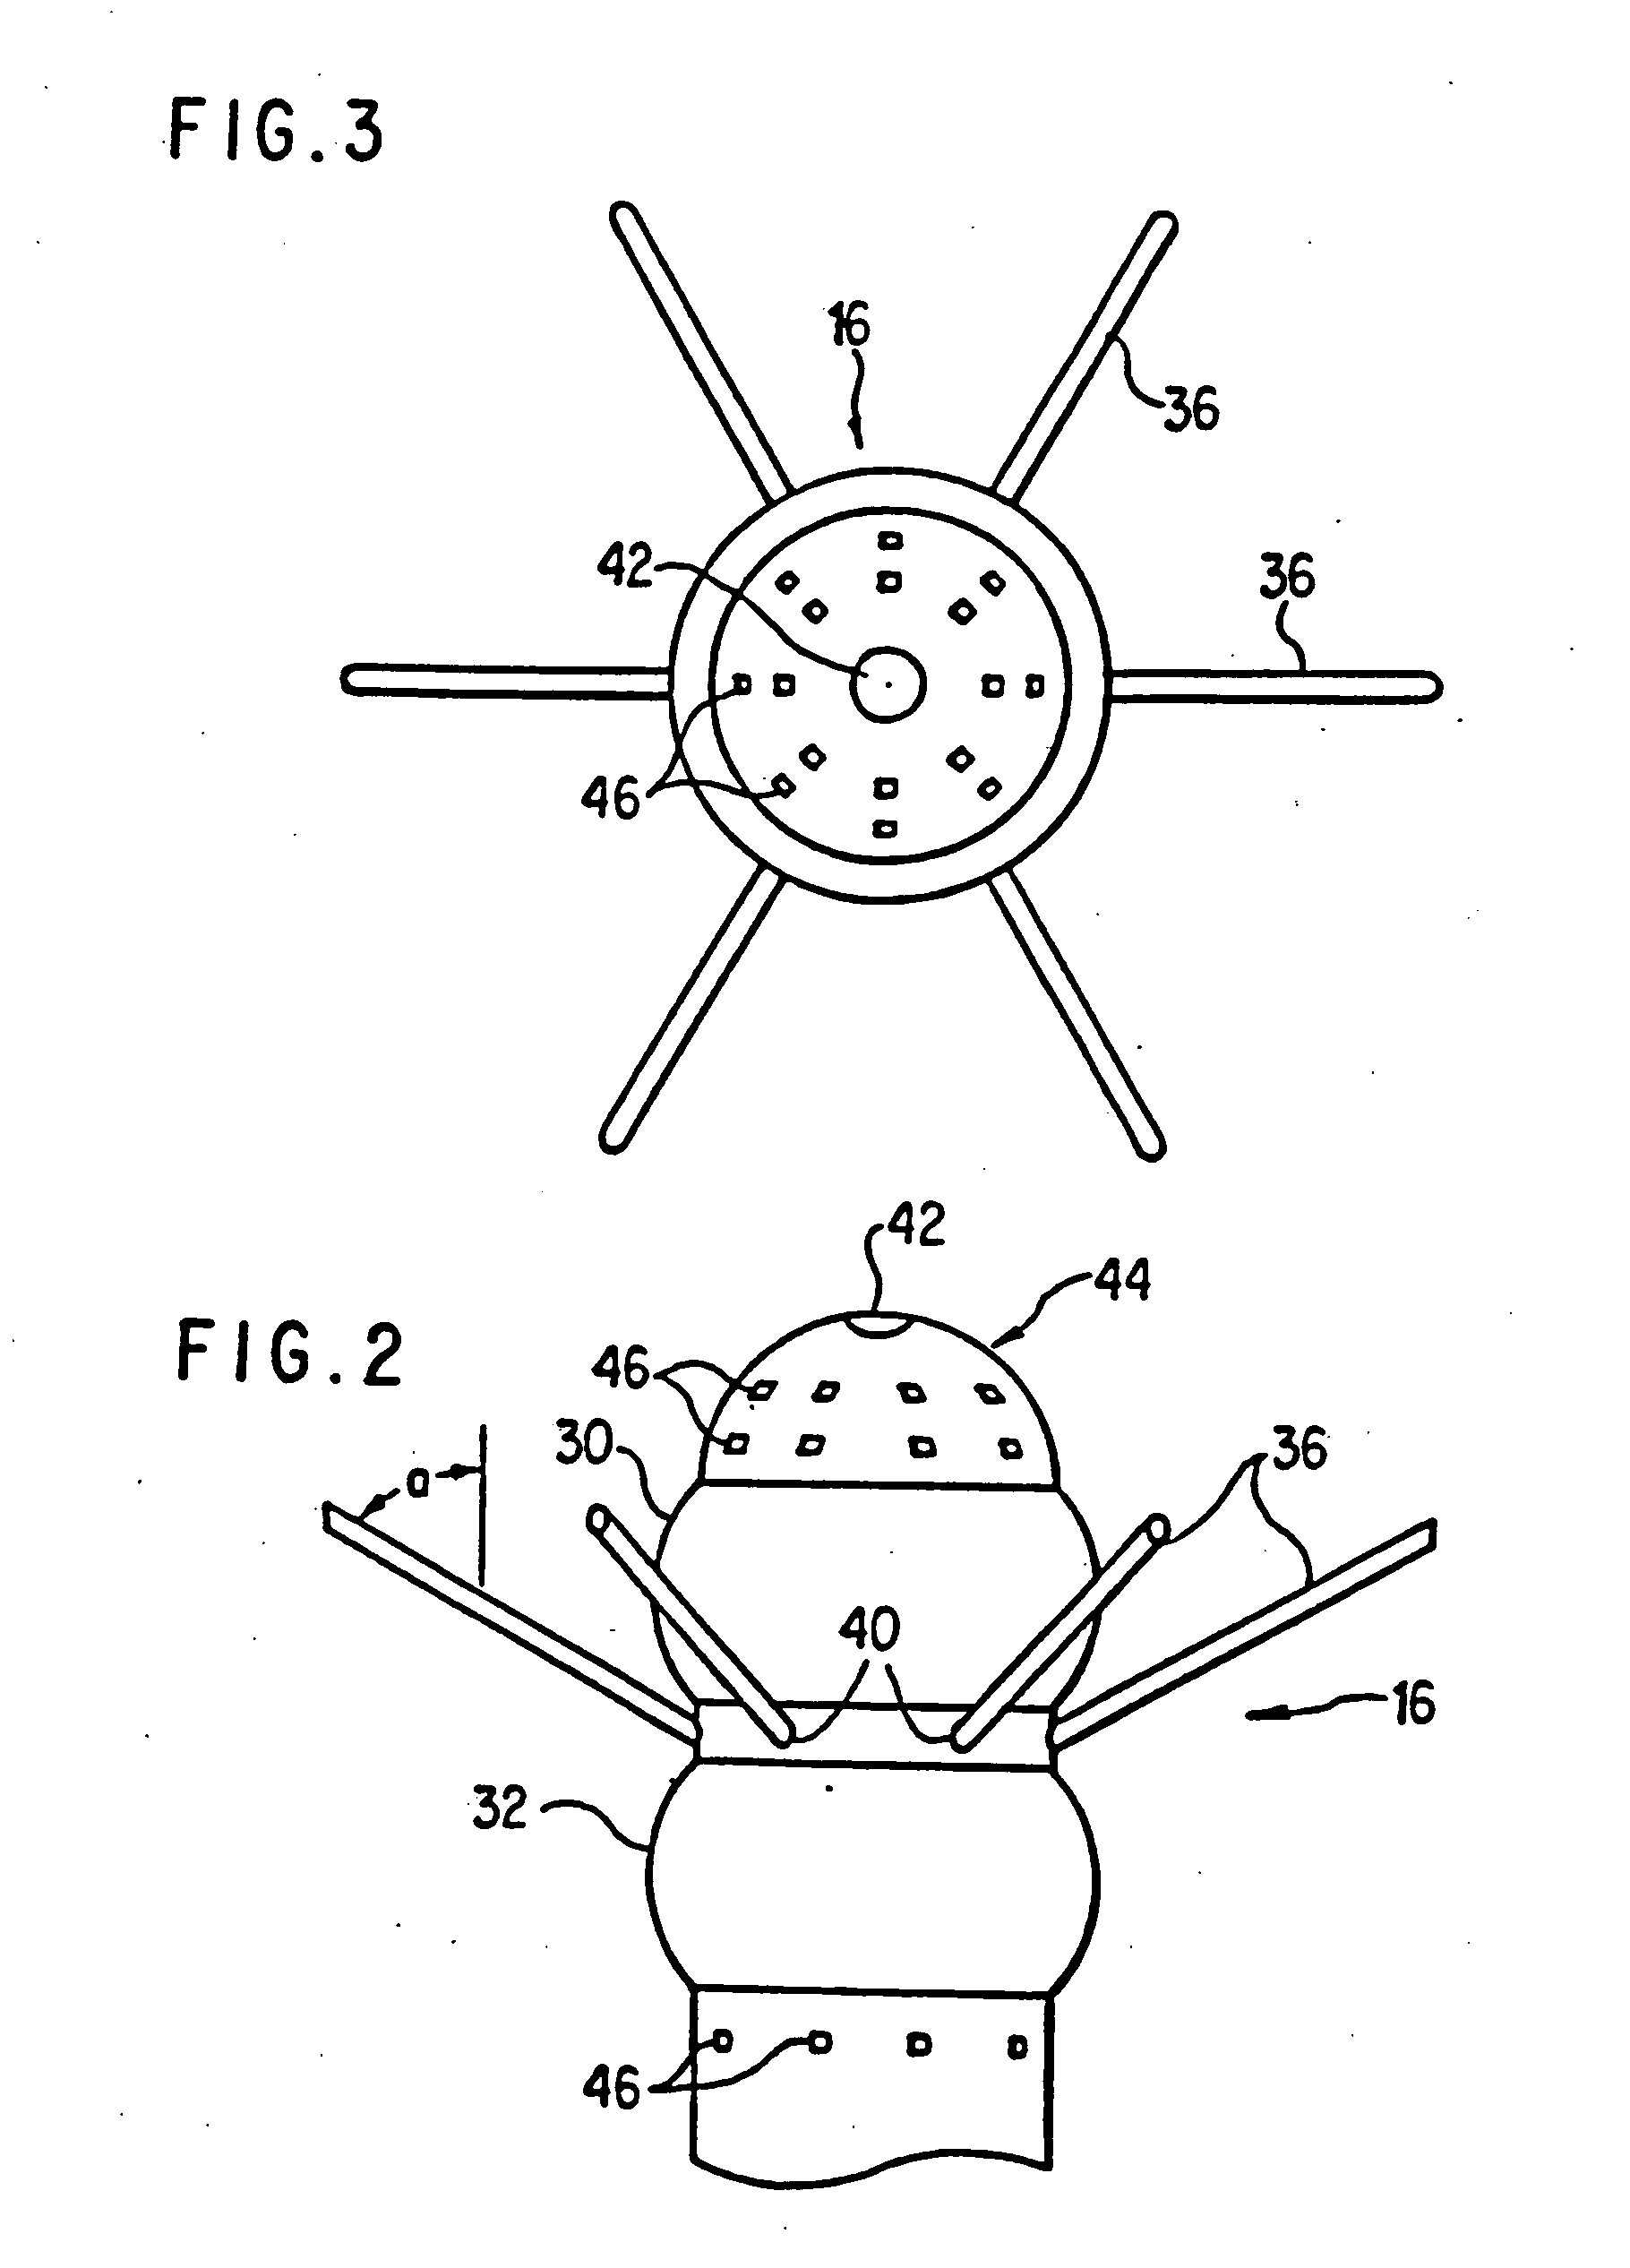 Medical probe device and method